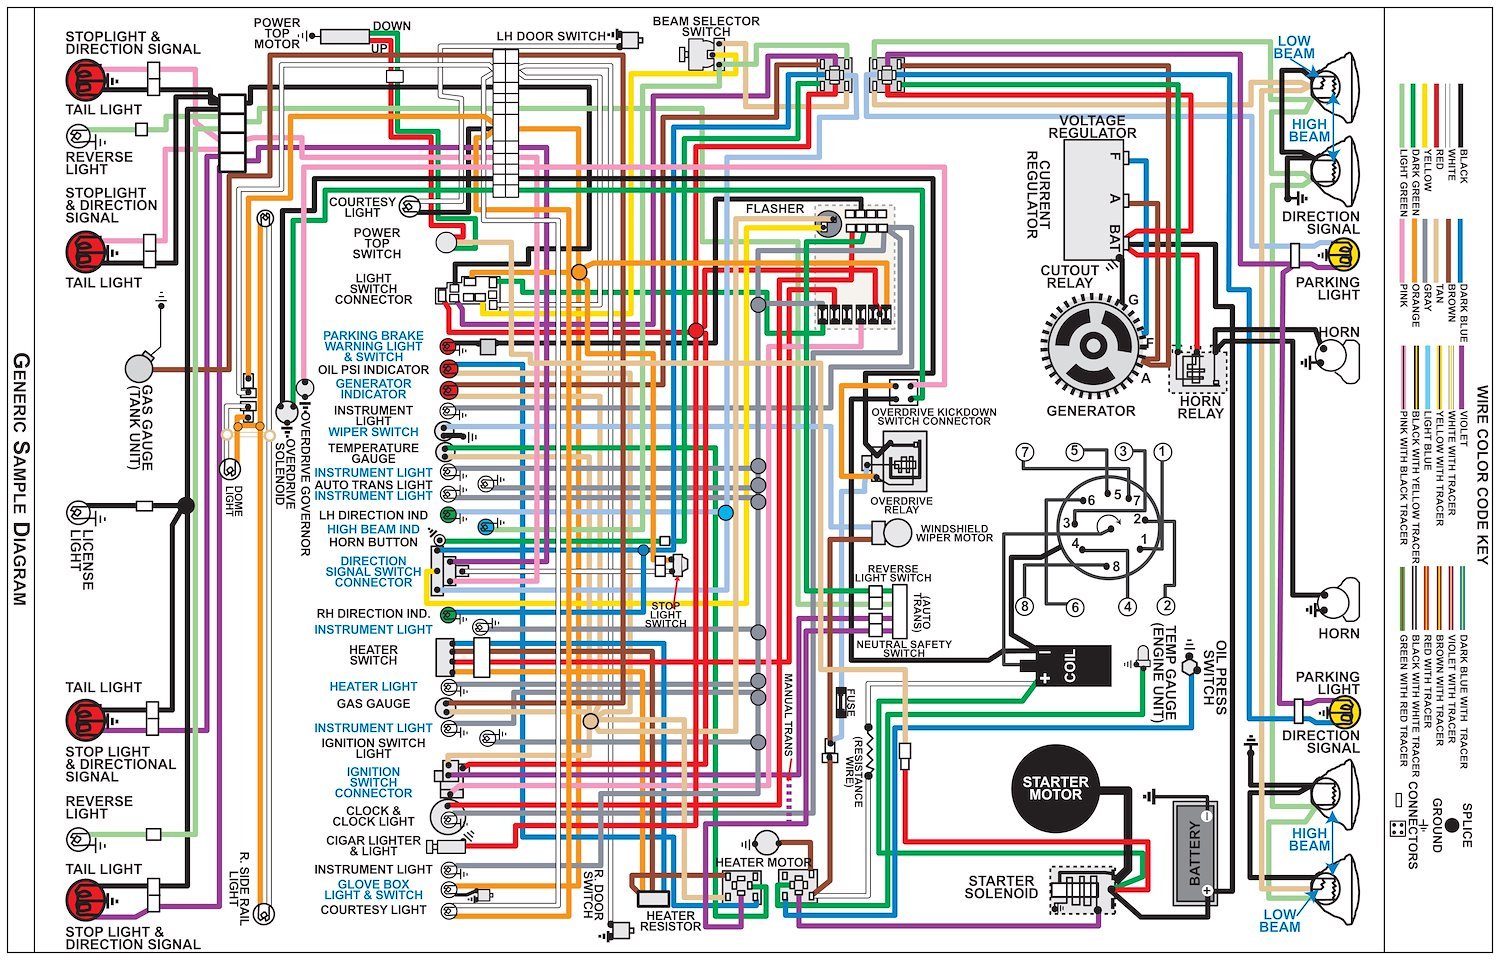 Wiring Diagram for 1974 Dodge Coronet, Charger with